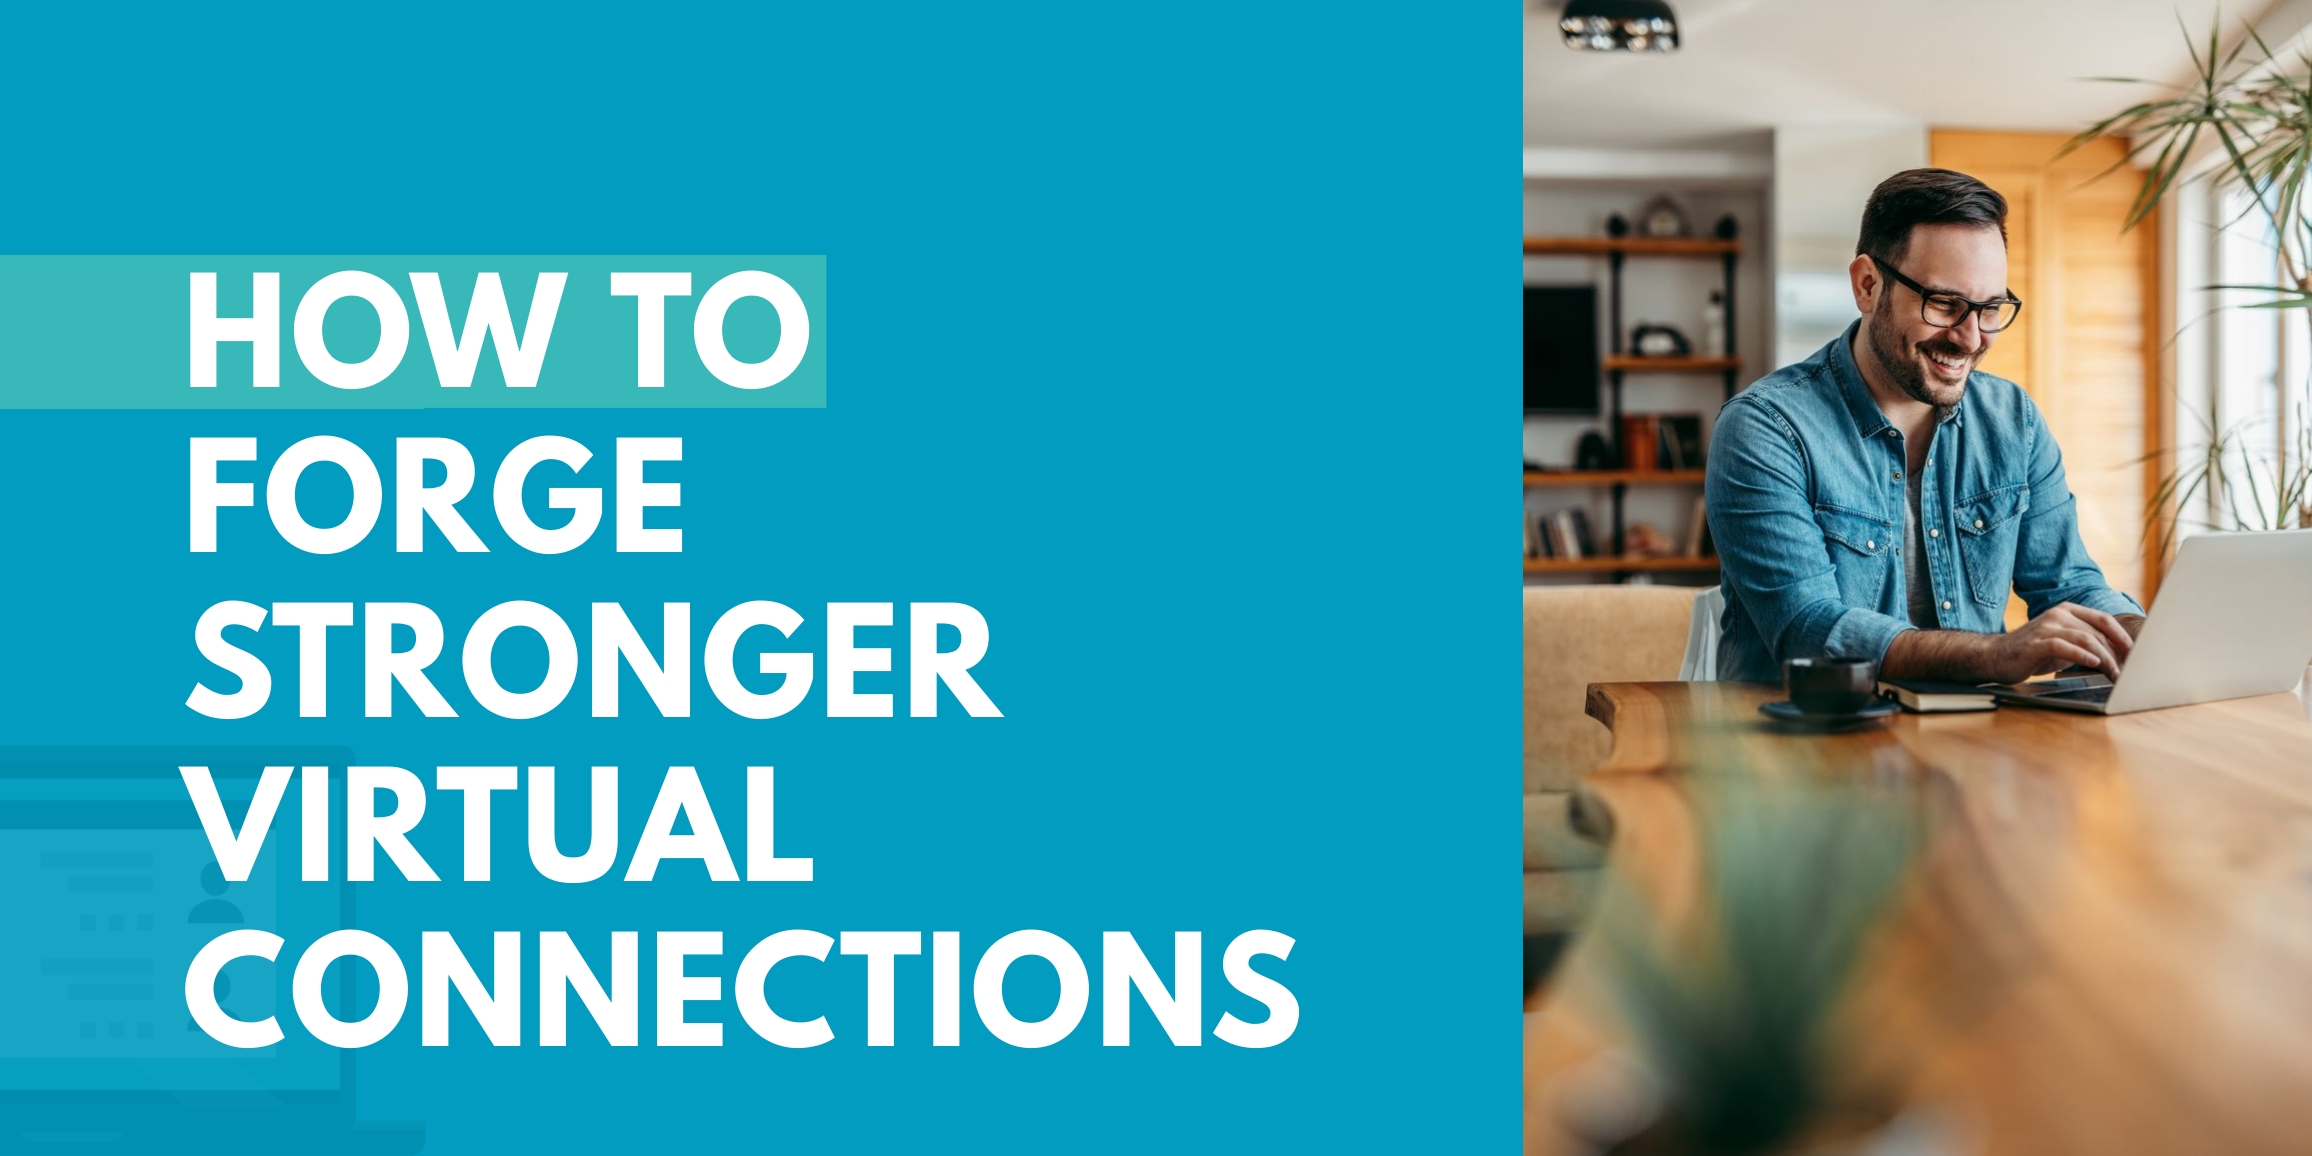 How to forge stronger virtual connections header